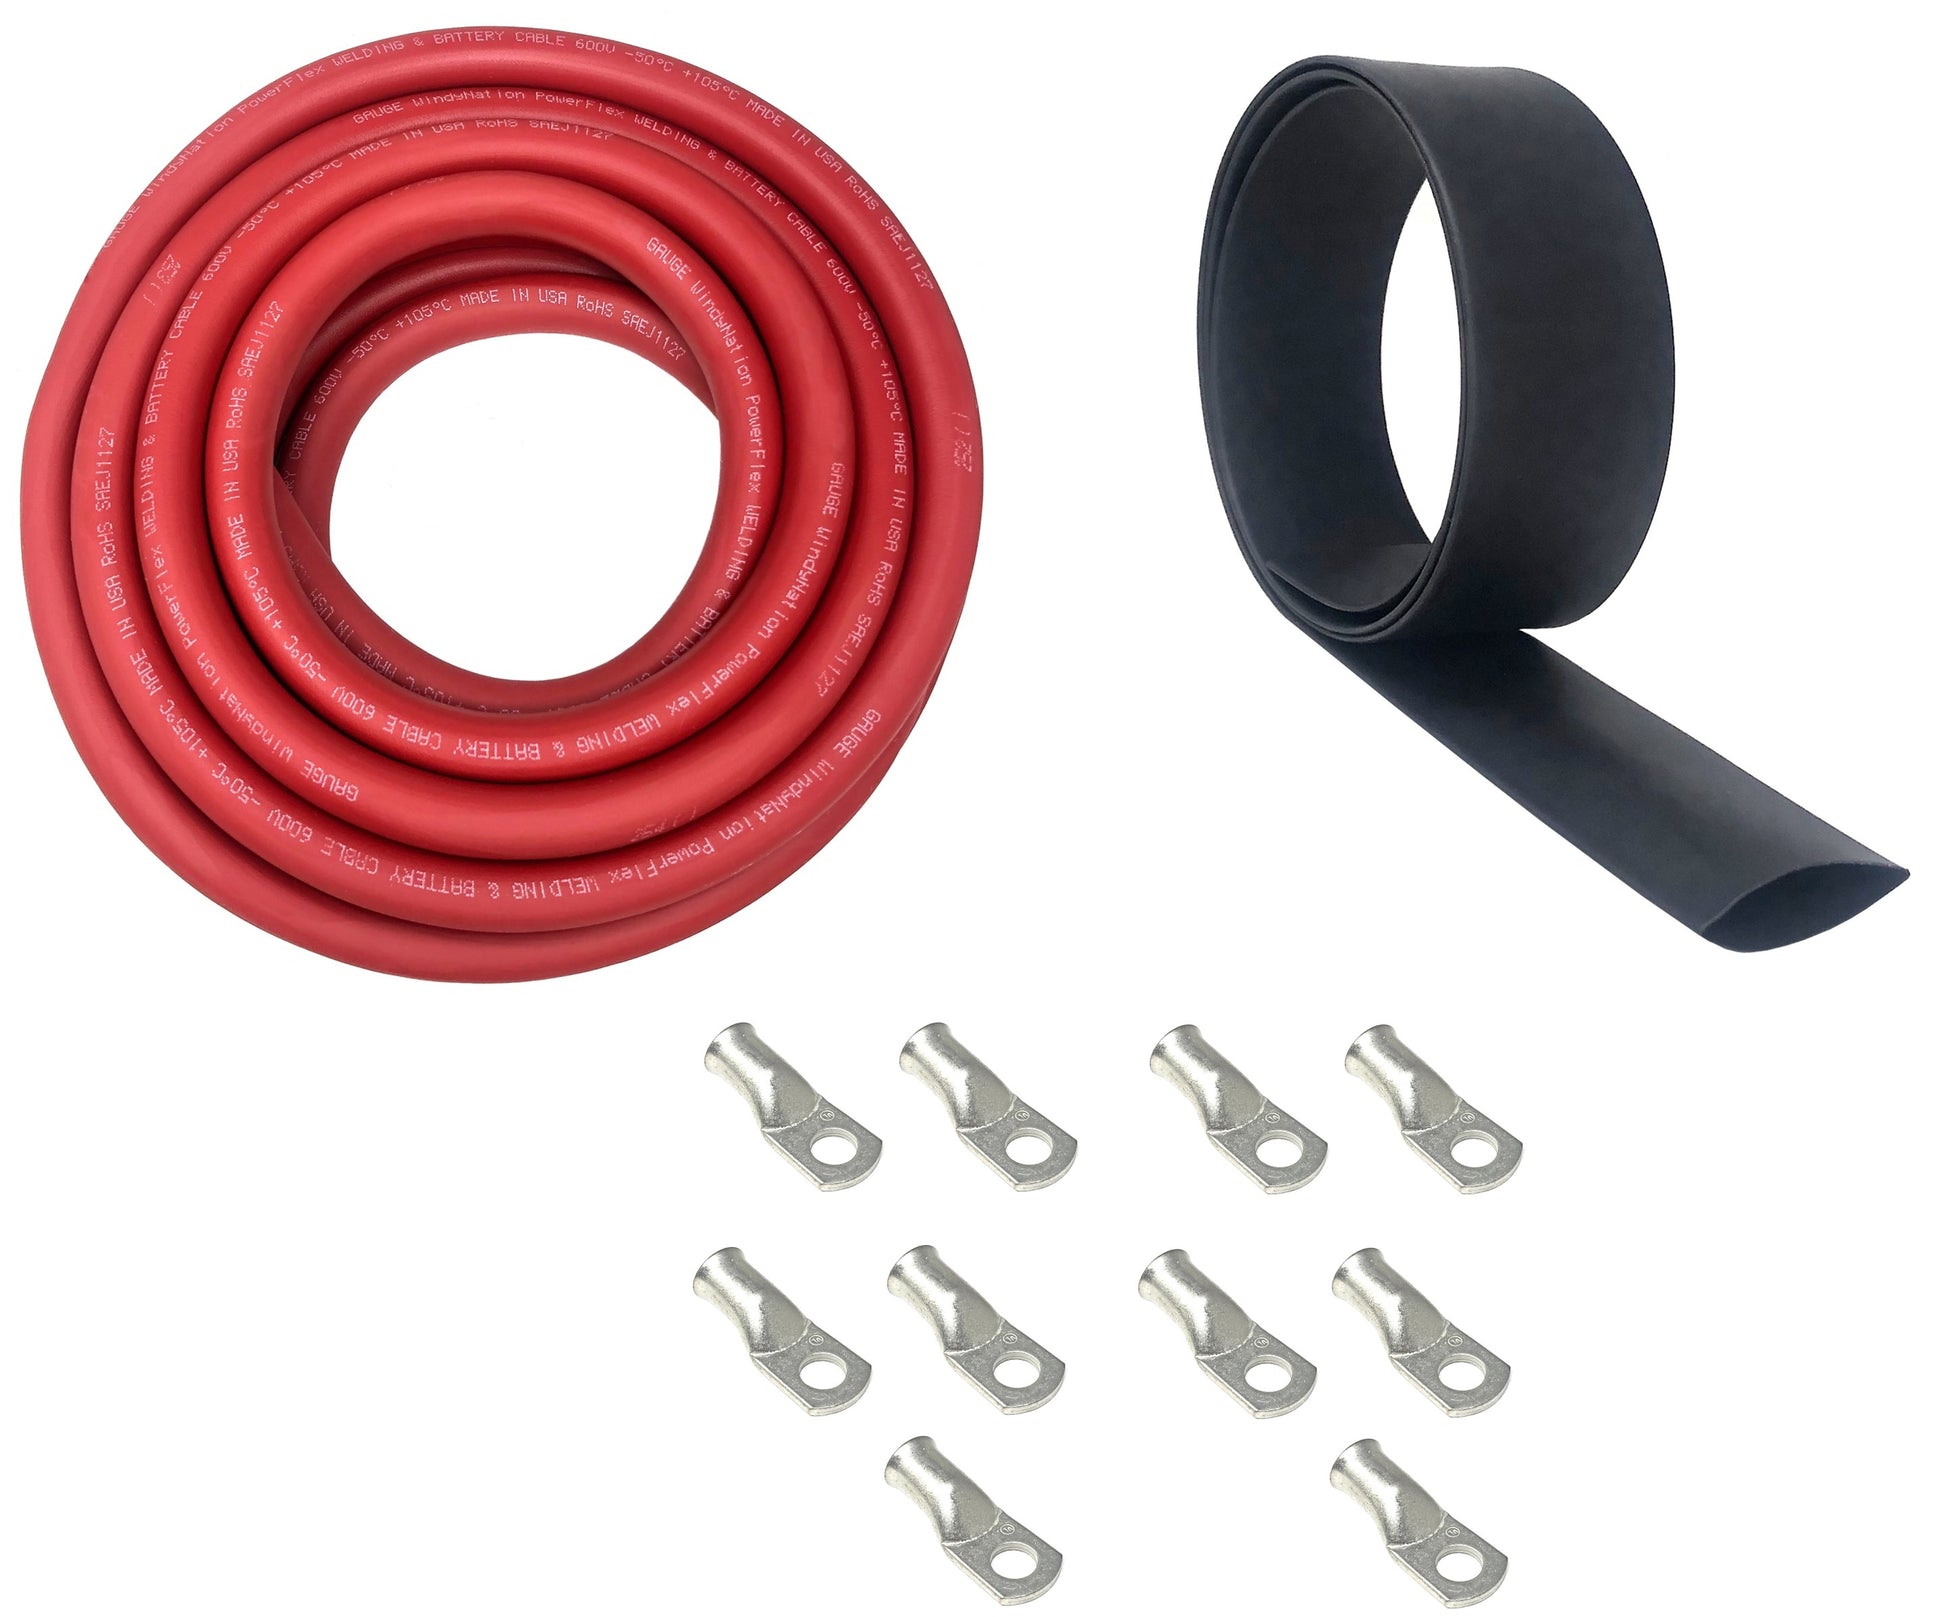 red welding cable with lugs and heat shrink kit